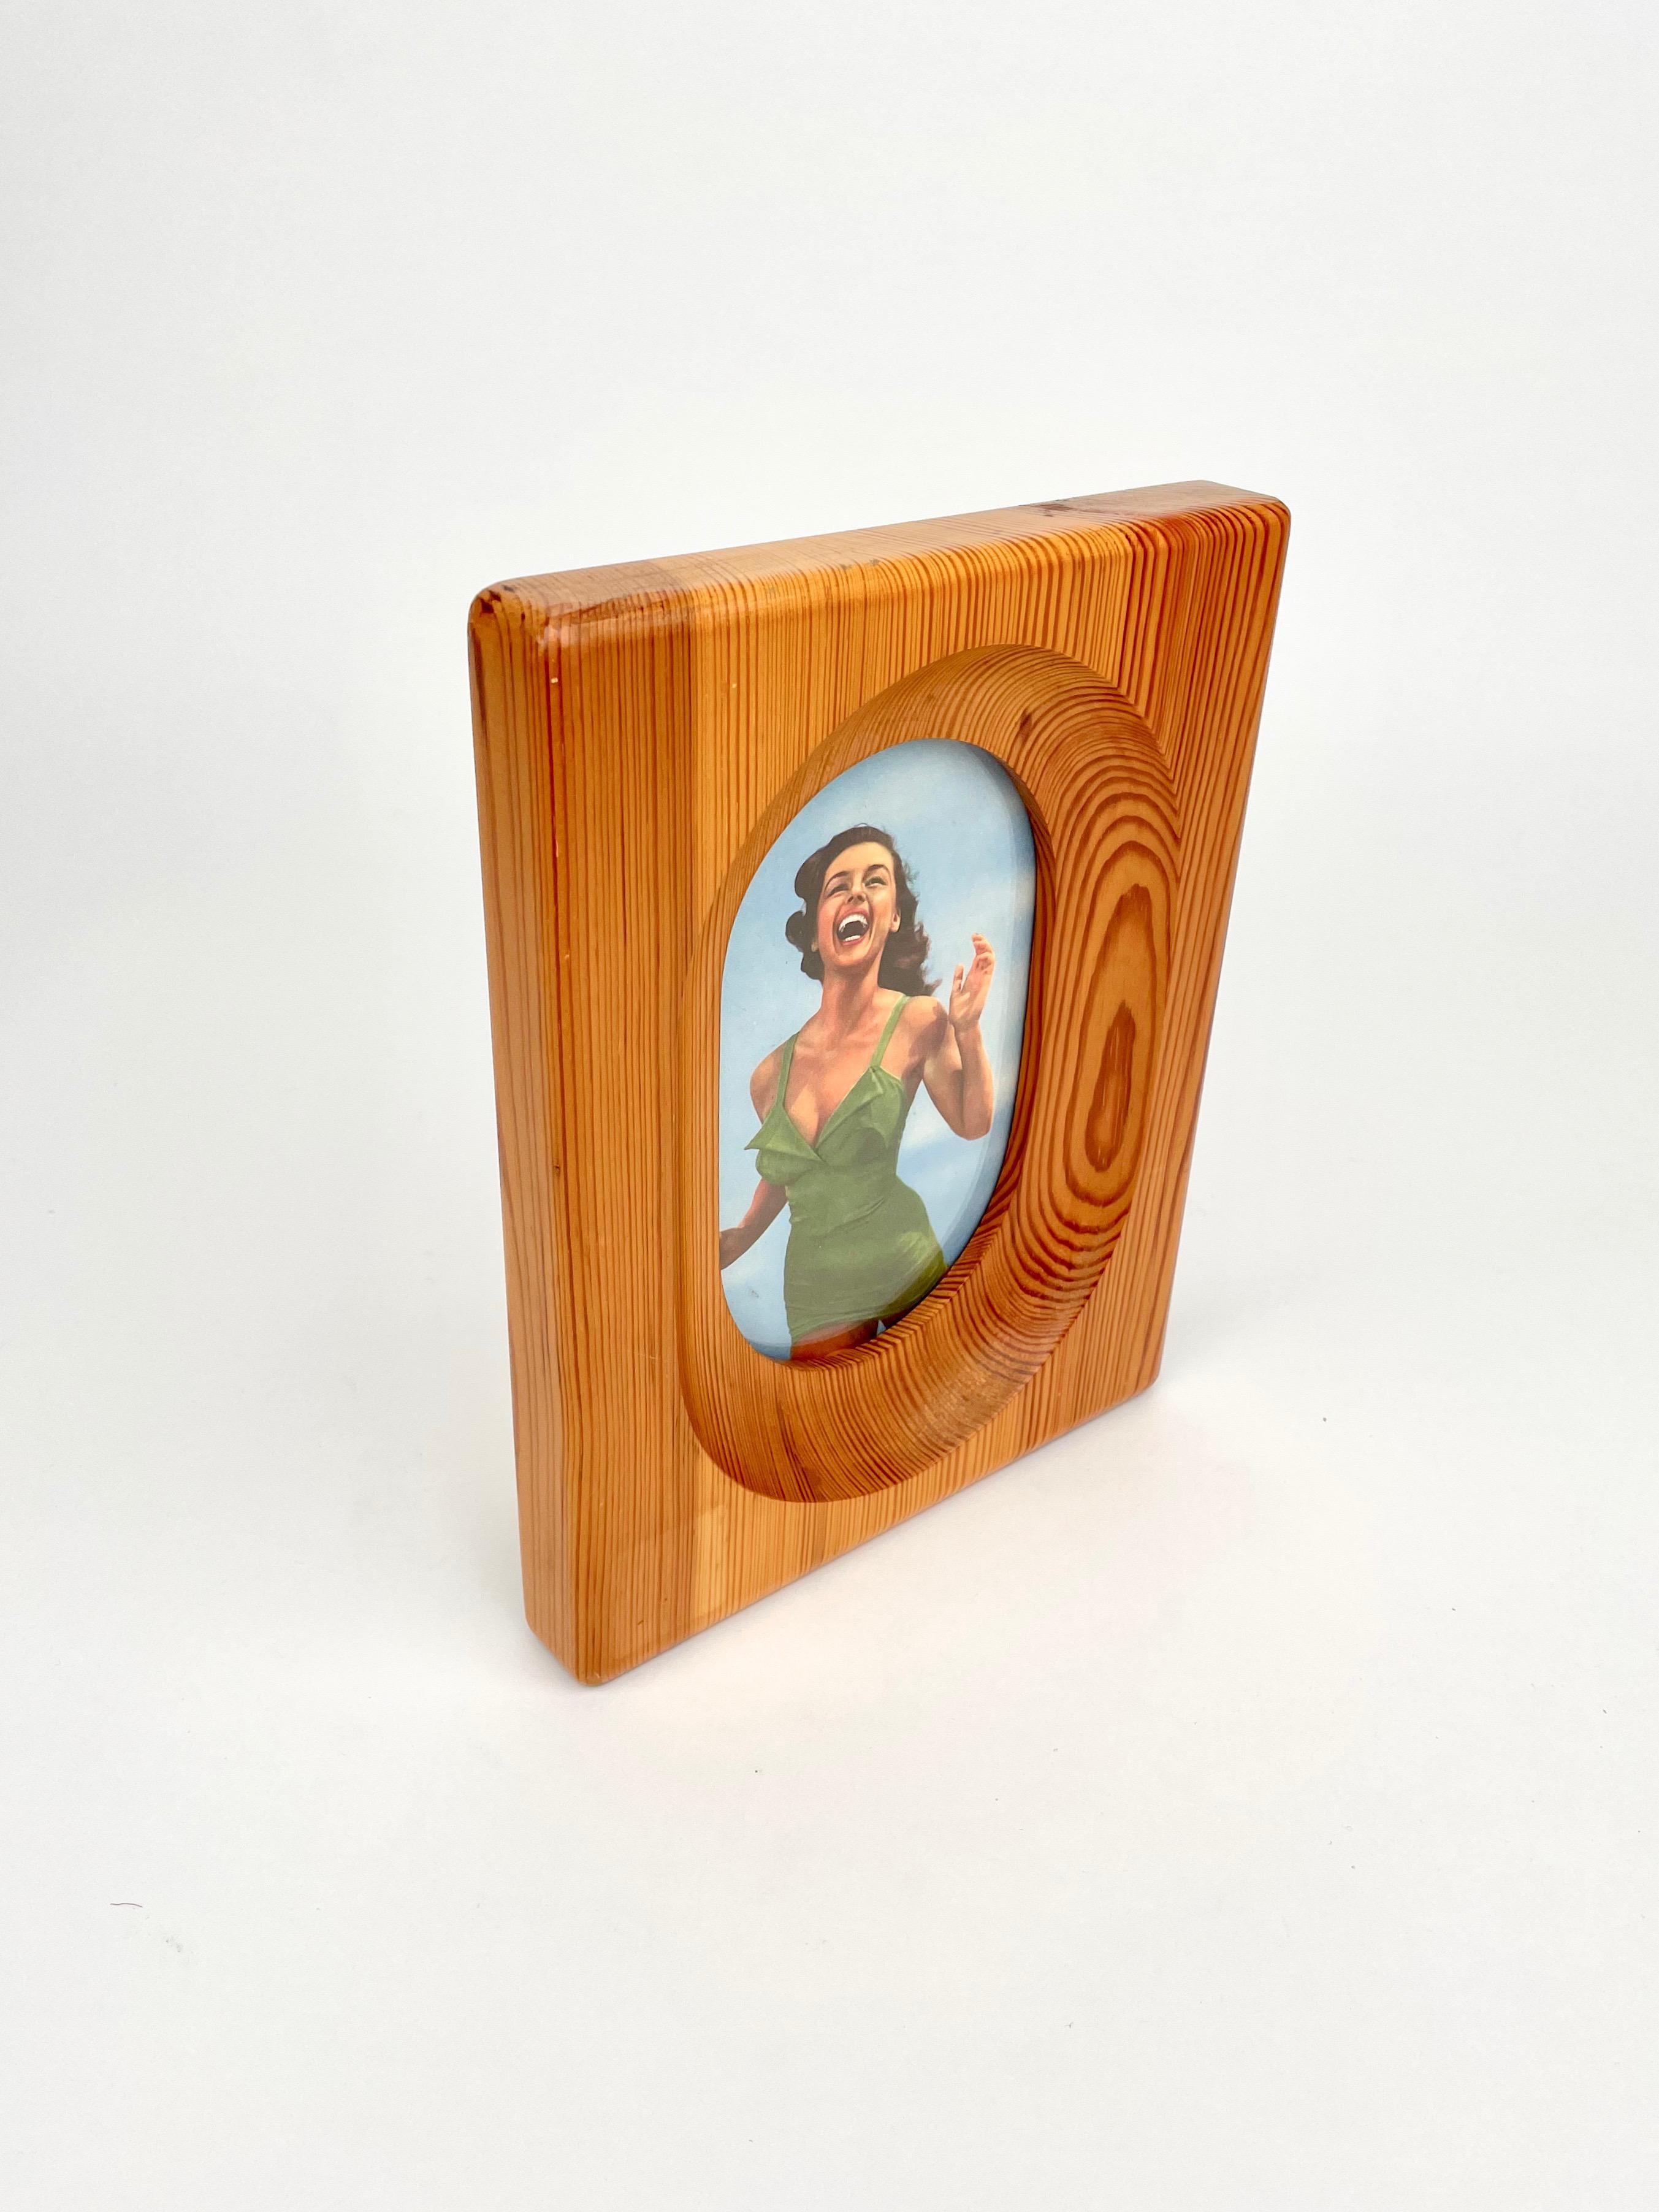 Mid-20th Century Wood and Glass Picture Frame by Alvar Aalto for Artek Italy, 1960s For Sale